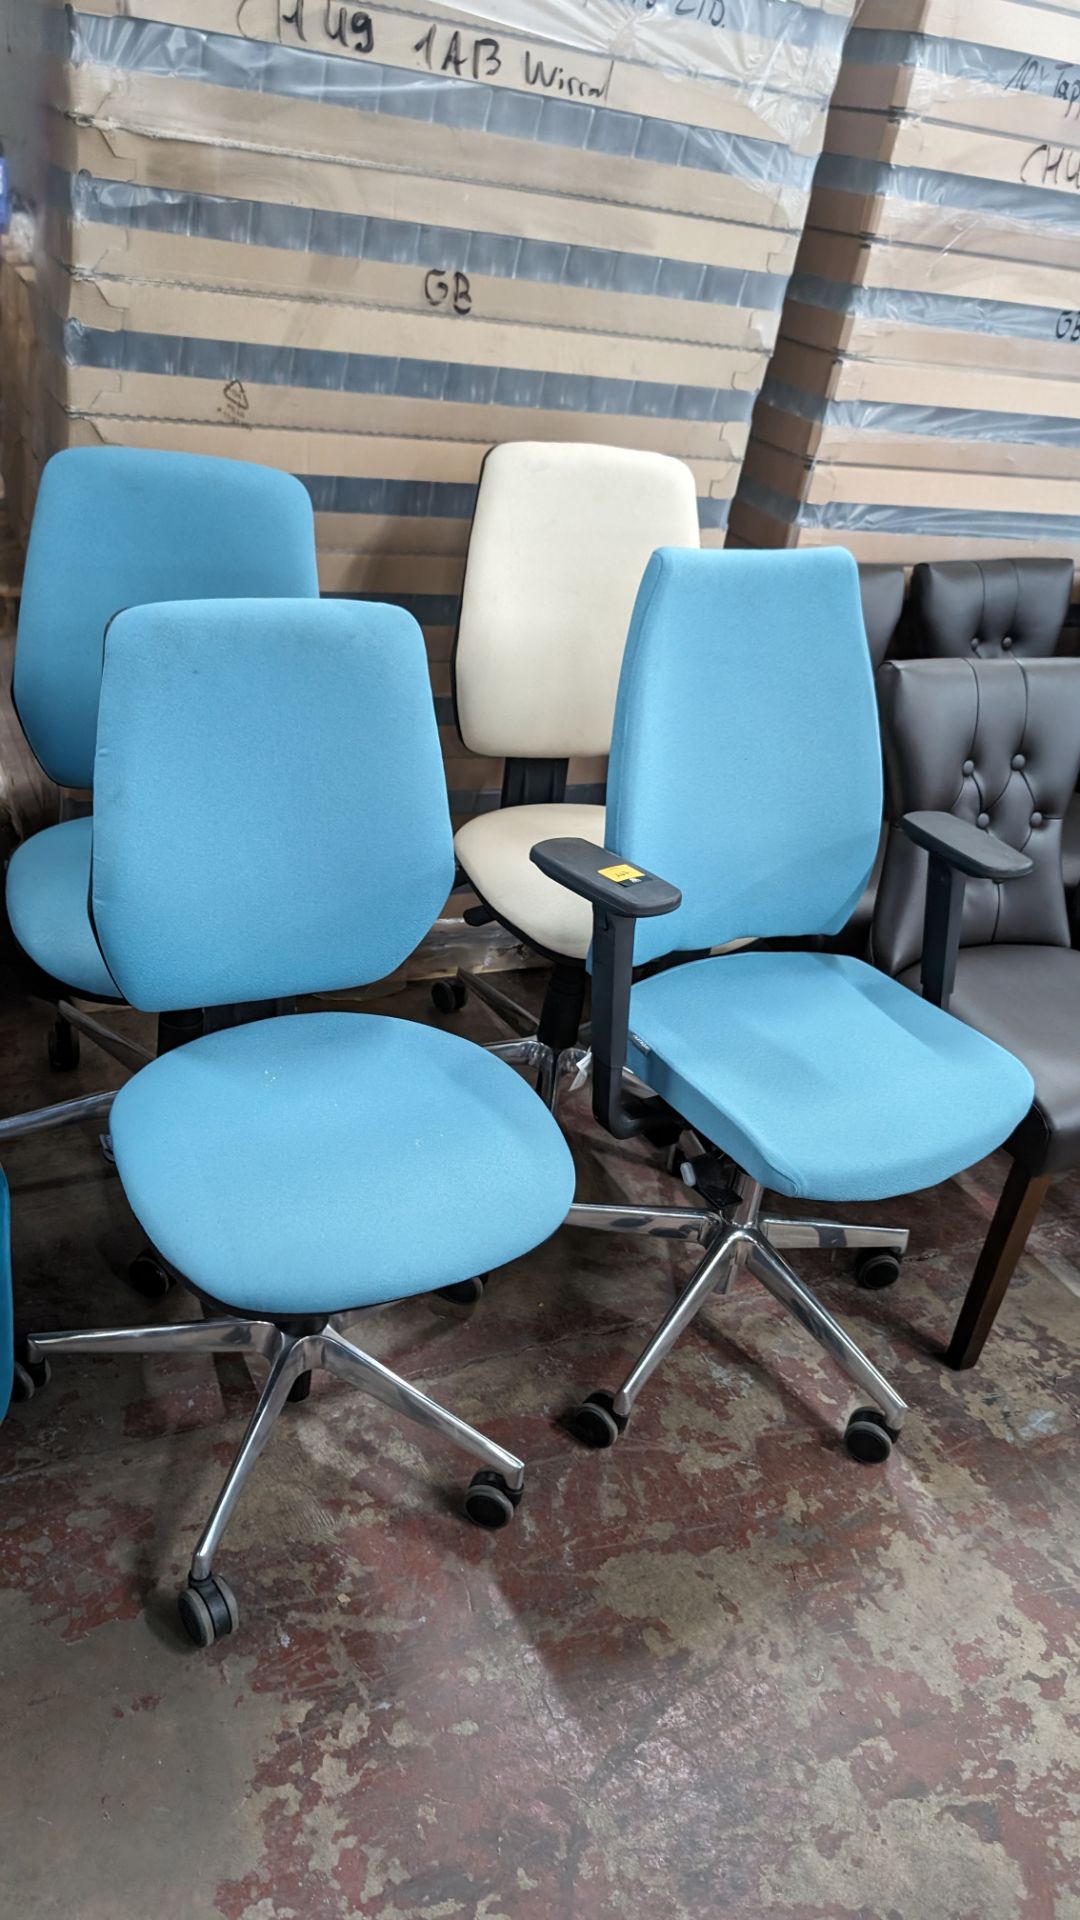 4 off operator's chairs, one of which has arms. 3 of the chairs are finished in a matching turquois